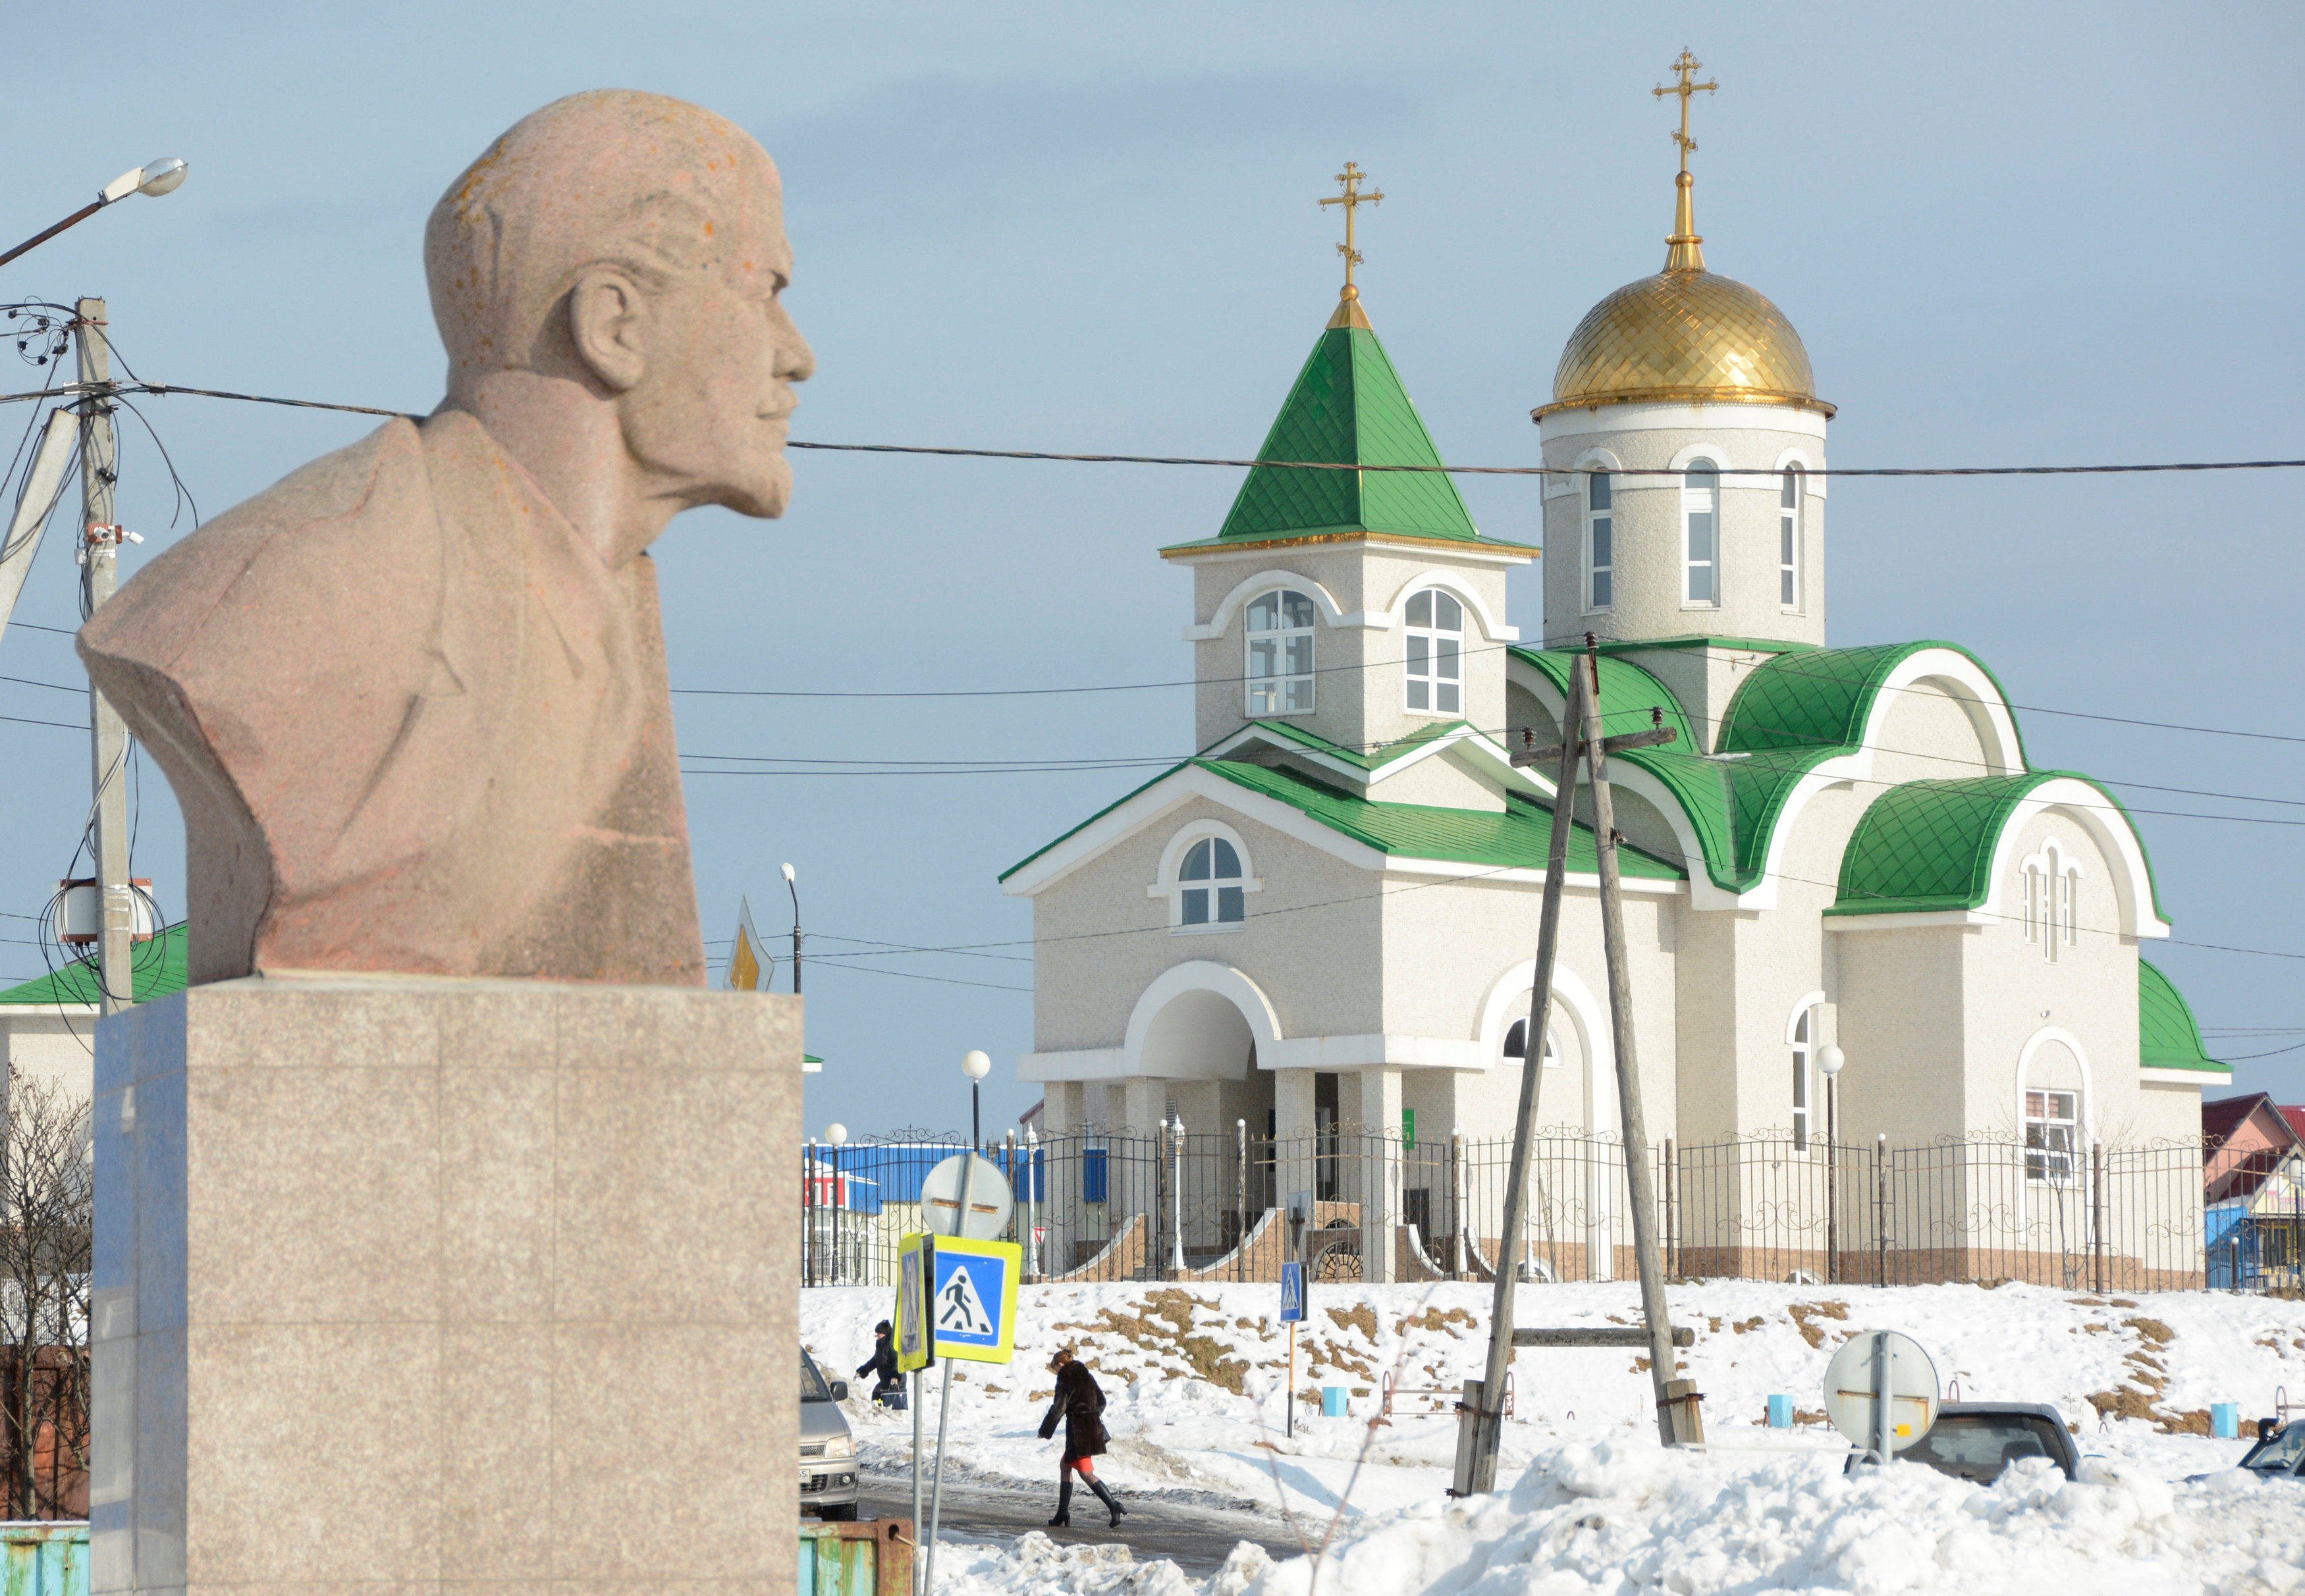 A bust of Soviet state founder Vladimir Lenin is seen in front of a Russian Orthodox church in Yuzhno-Kurilsk on the Island of Kunashir, one of four islands known as the Southern Kurils in Russia and the Northern Territories in Japan. Photo: Reuters